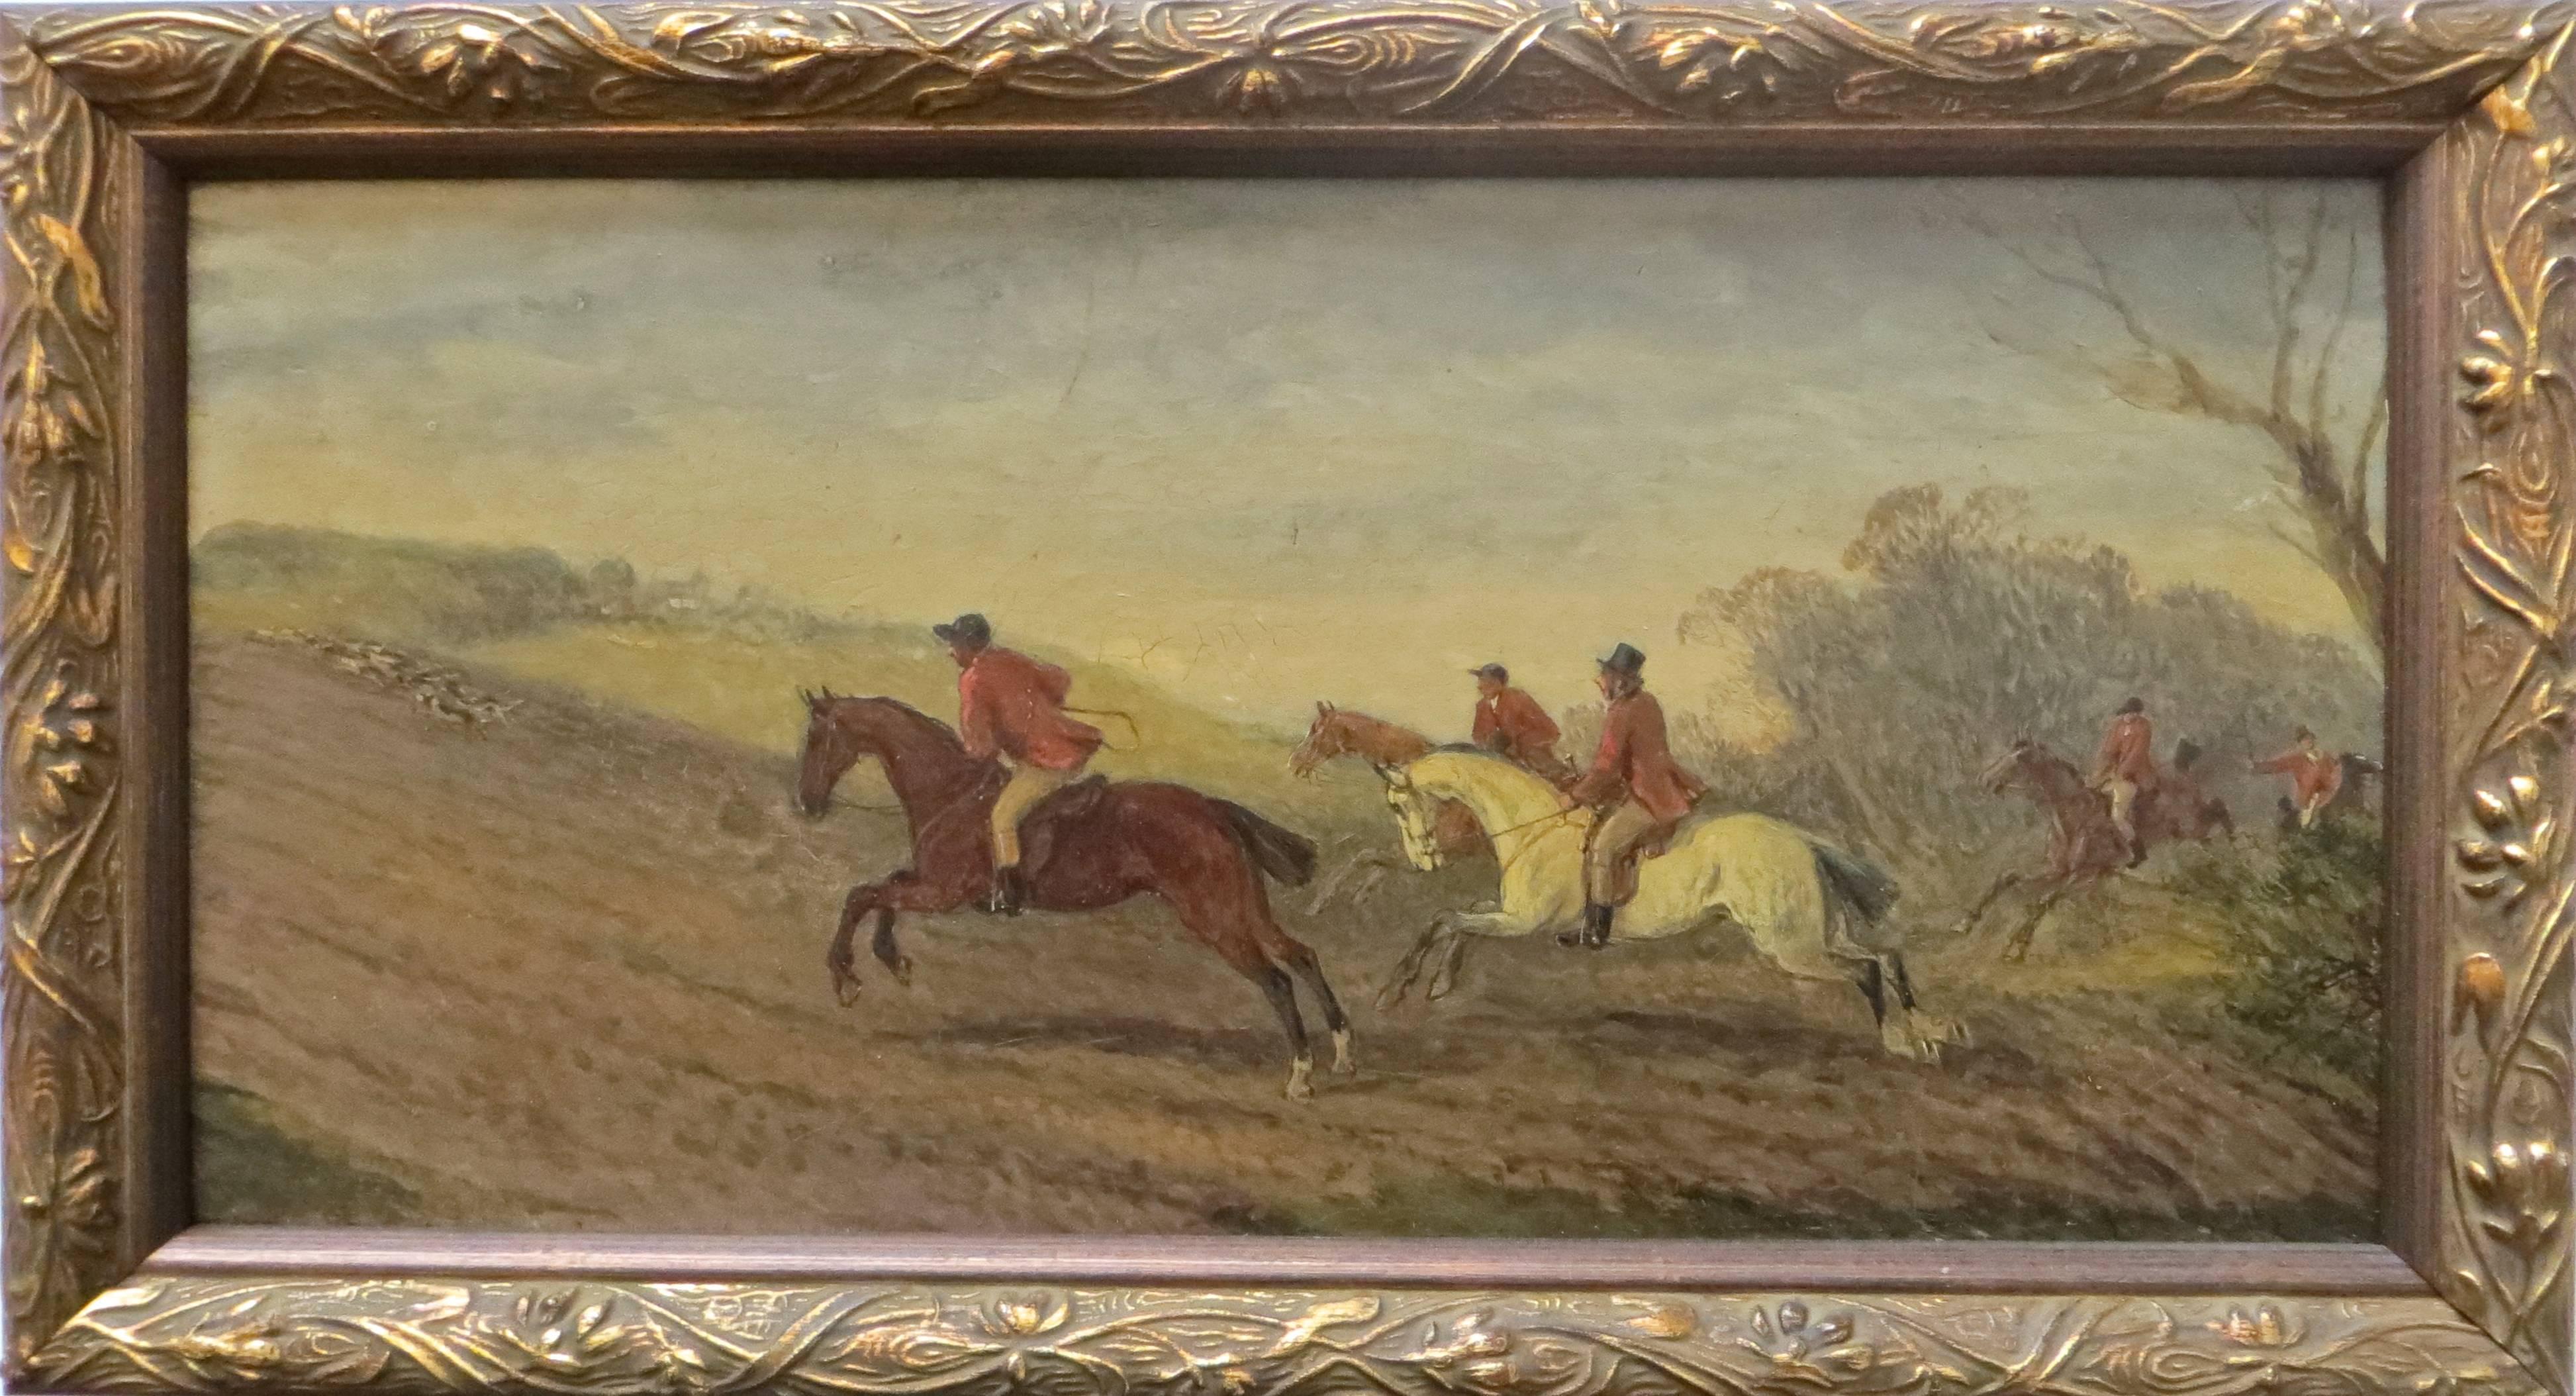 Painted Early 19th Century English Hunting Scene Oil on Board